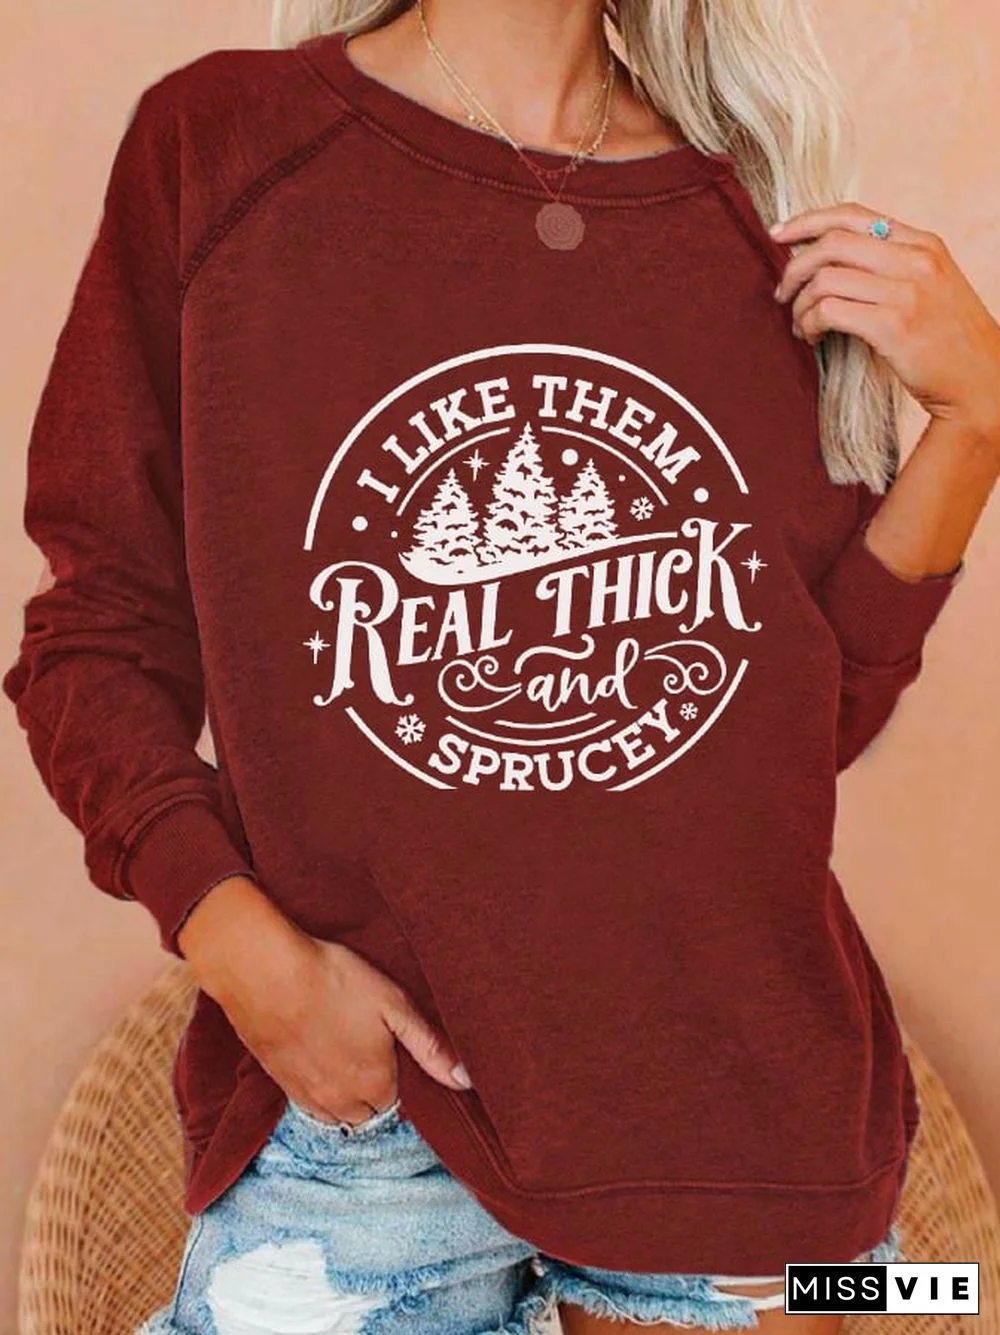 Women's Christmas I Like Them Real Thick And Sprucy Printed Casual Sweatshirt